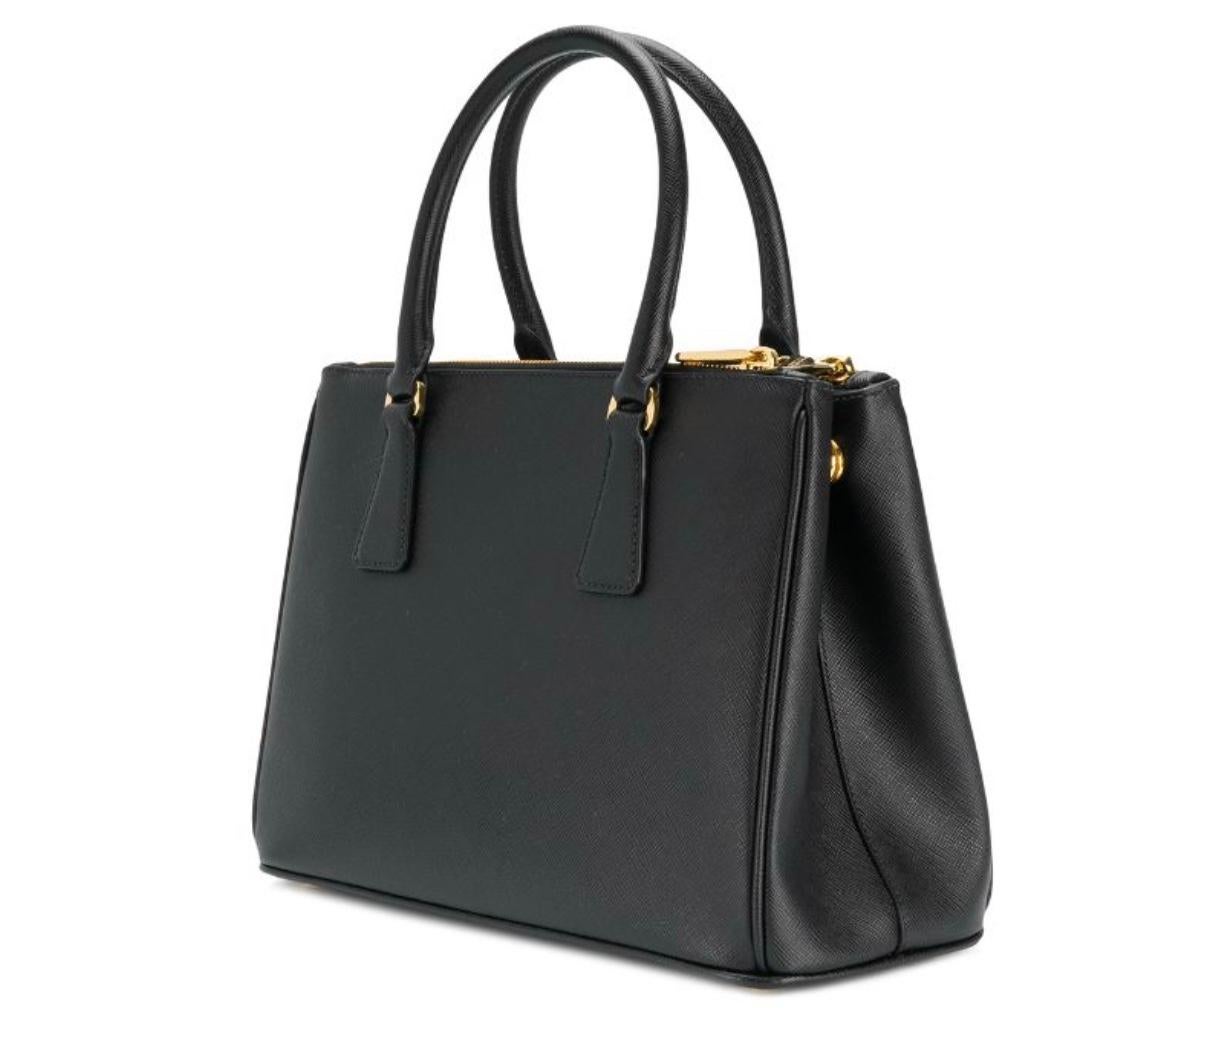 Prada Saffiano Lux Double-Zip Tote Bag, Black
Boxy saffiano leather top handle bag with polished hardware and a removable crossbody strap. Double top handles Removable, adjustable shoulder strap Side-snap gussets Open top Goldtone hardware Two